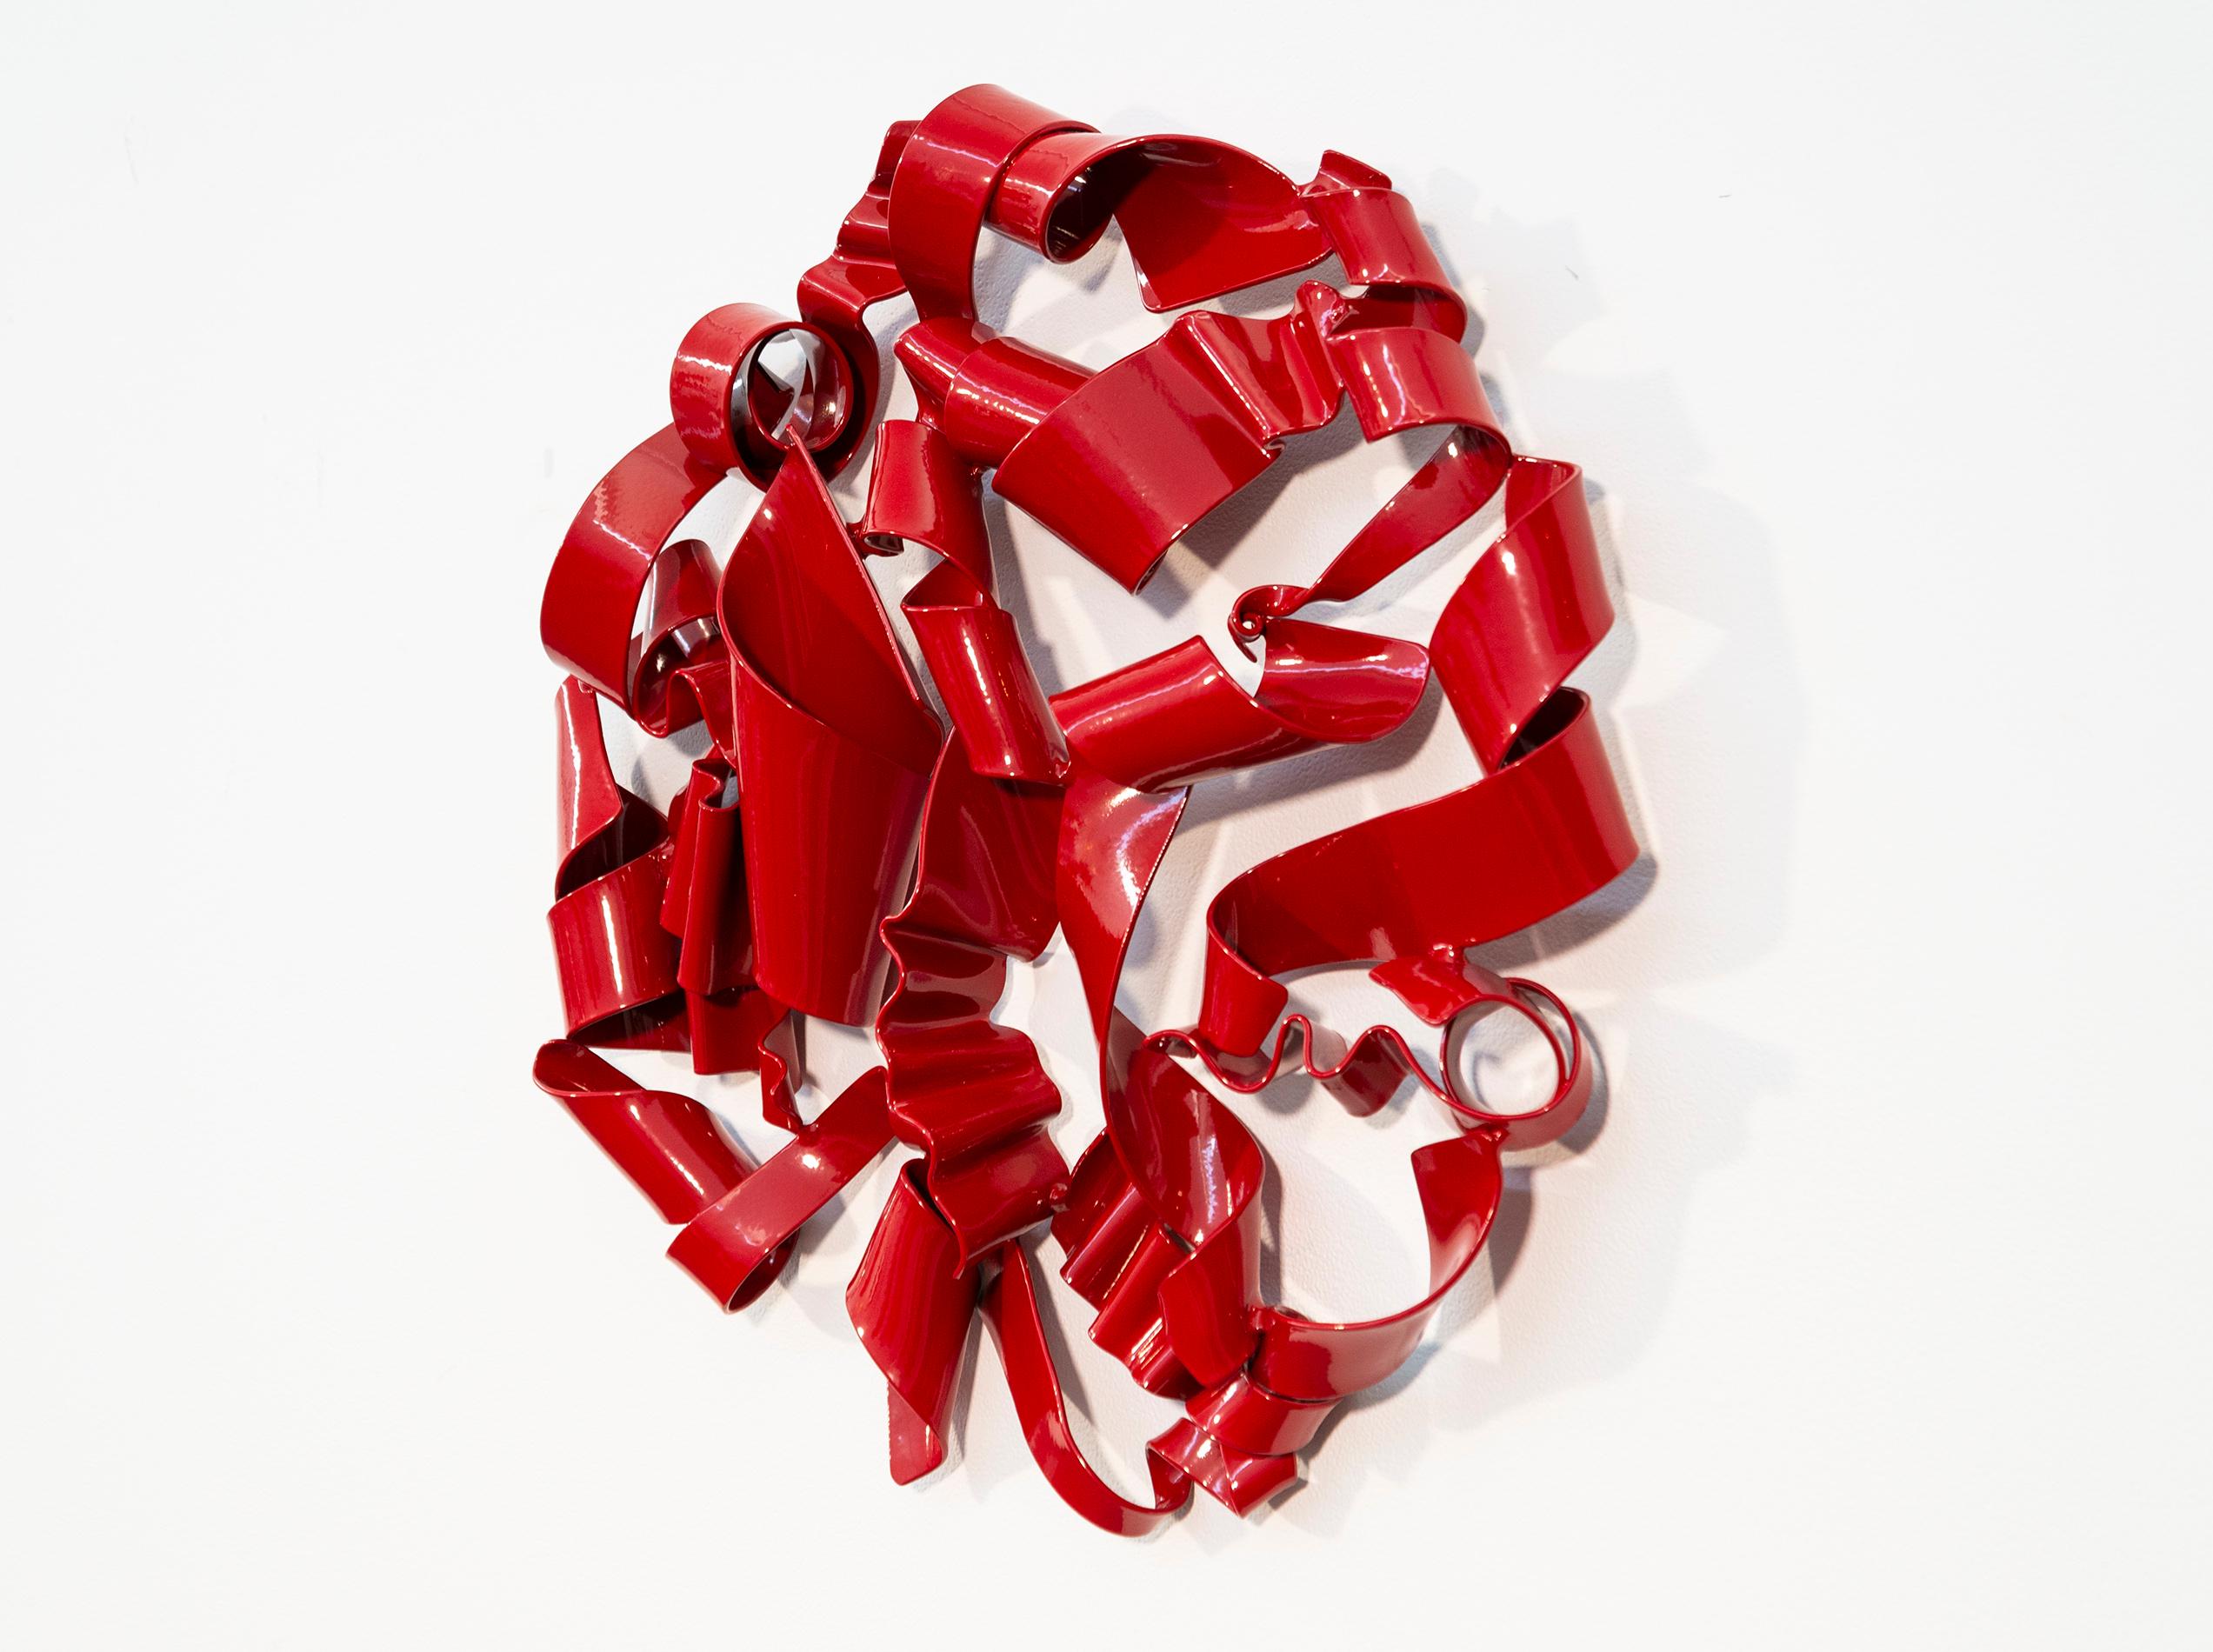 Tabula Rasa 1 - red, contemporary, abstract, powder coated steel, wall sculpture - Sculpture by Stefan Duerst